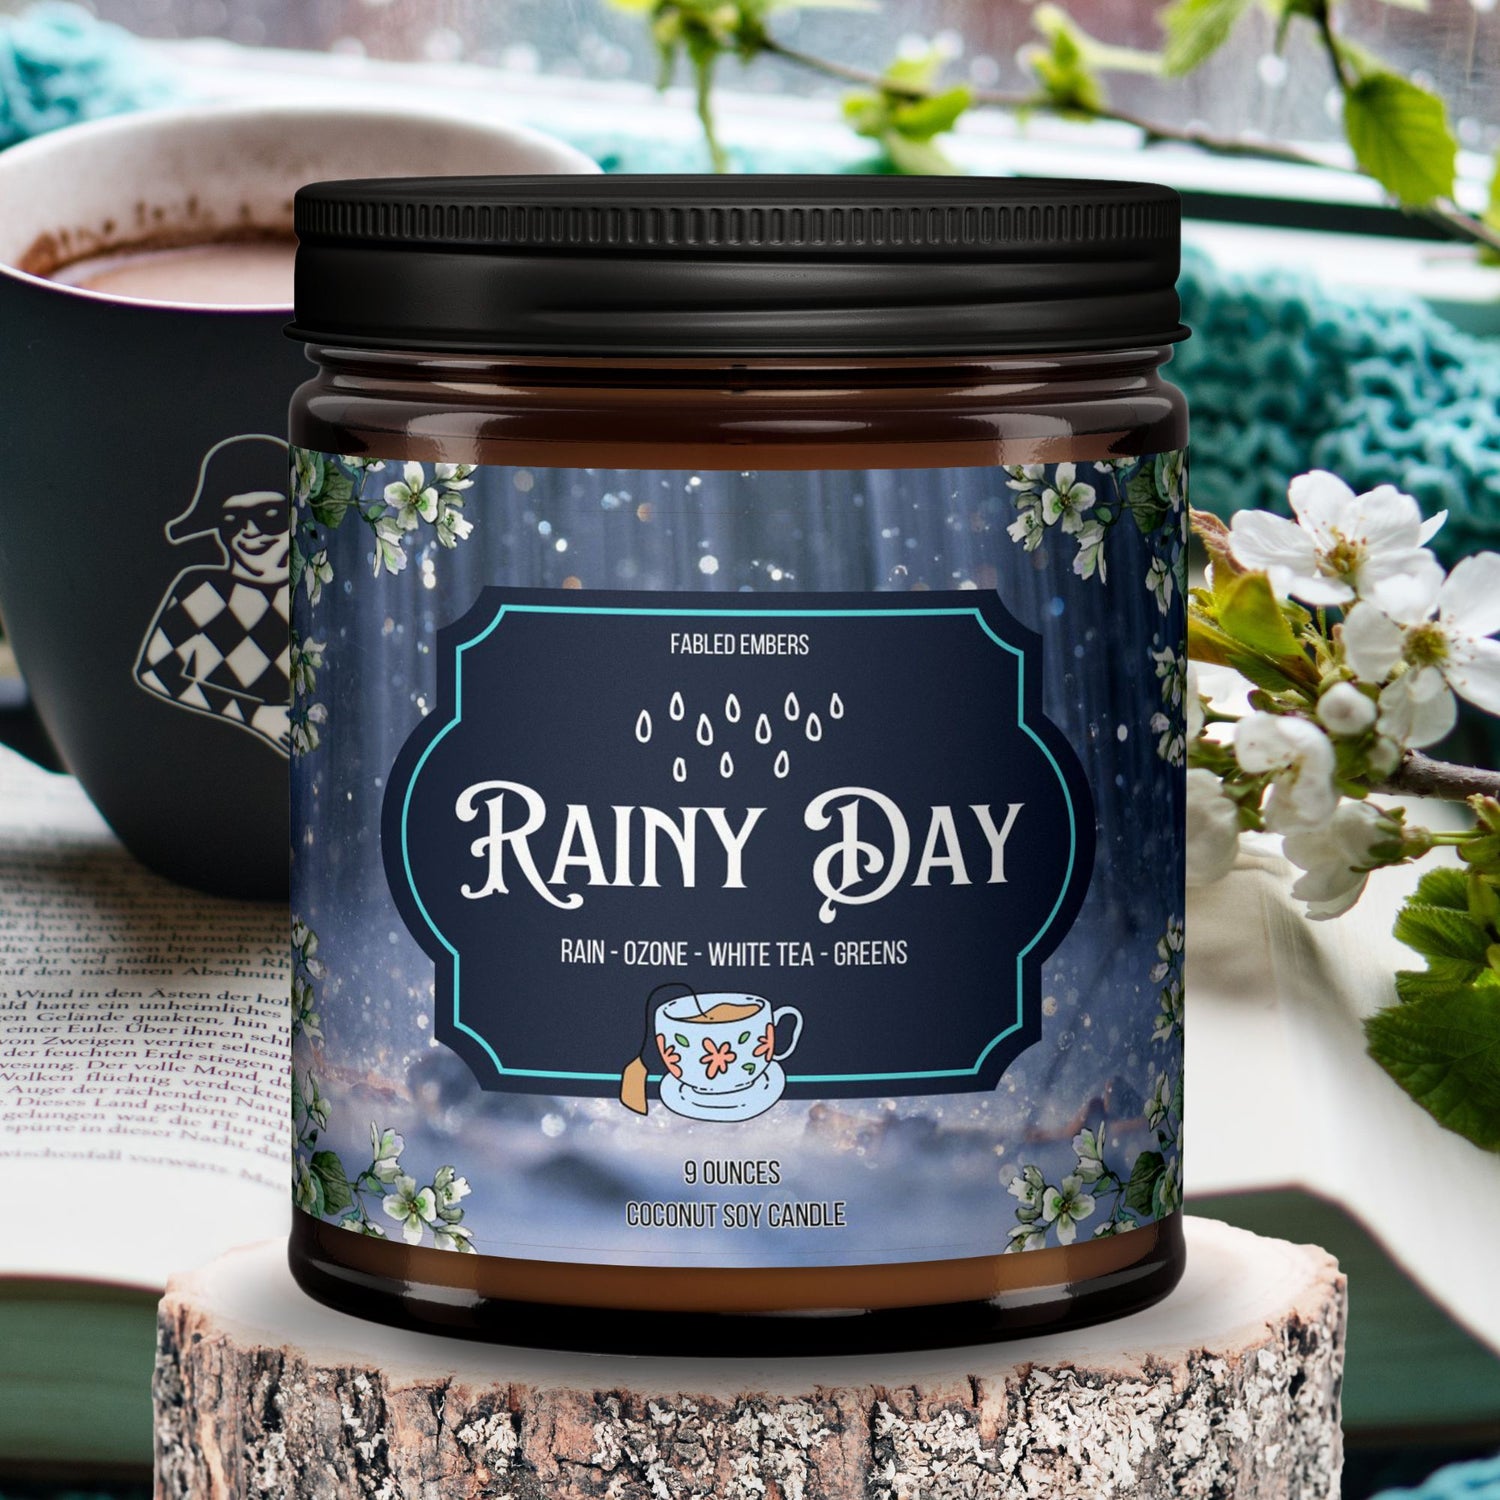 Rainy Day candle 9 ounces coconut soy smells like reading on a rainy day mood amber glass jar